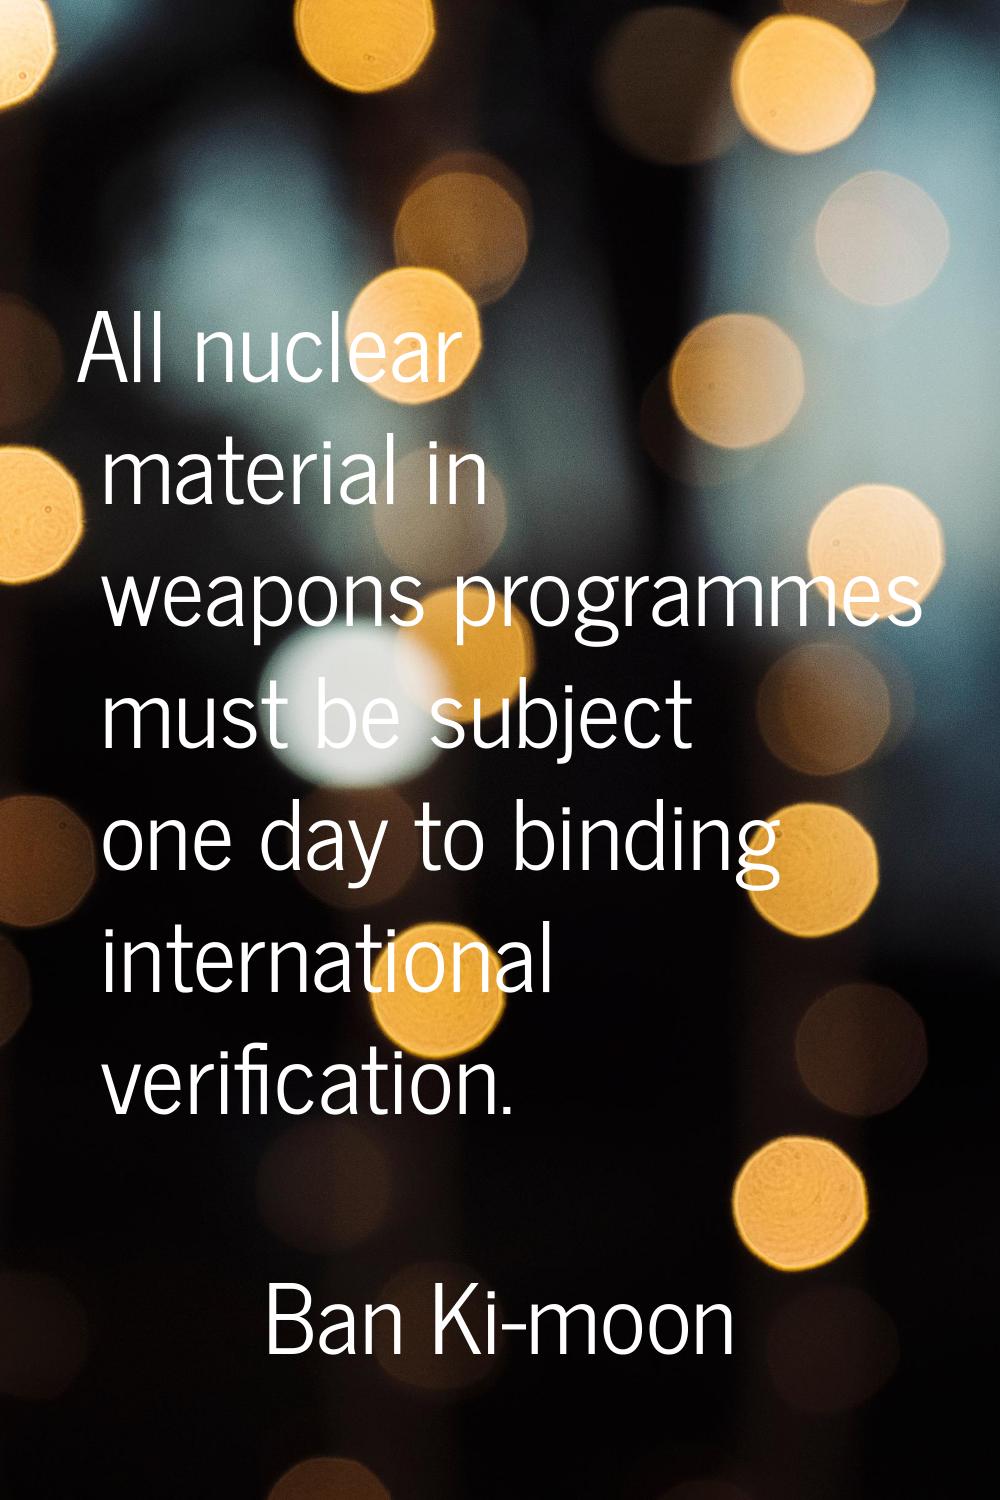 All nuclear material in weapons programmes must be subject one day to binding international verific